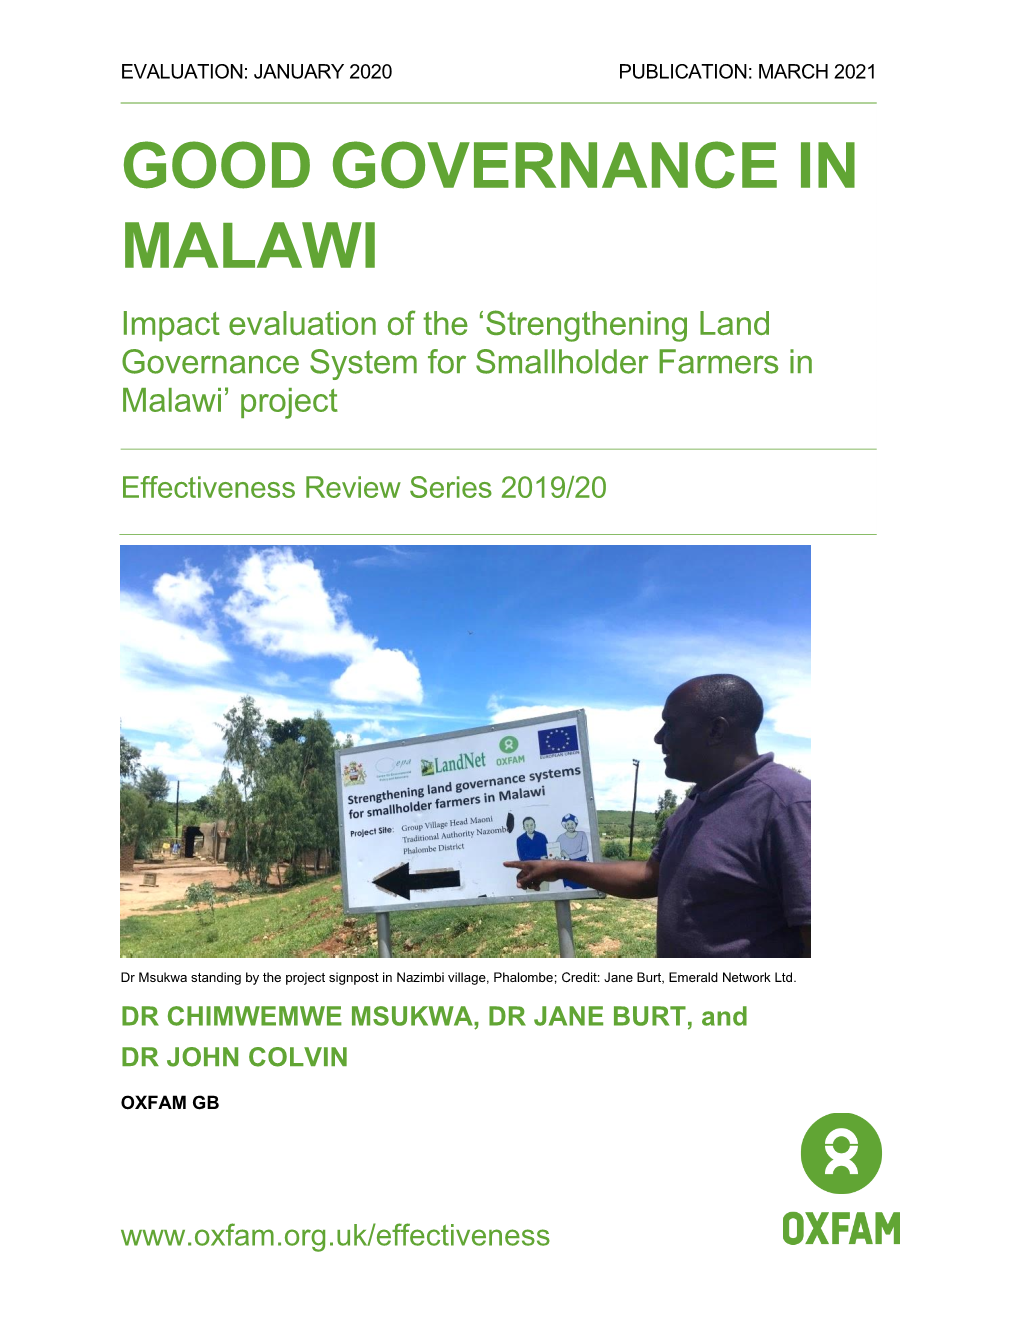 Good Governance in Malawi: Impact Evaluation of the ‘Strengthening Land Governance Systems for Smallholder Farmers in Malawi’ Project